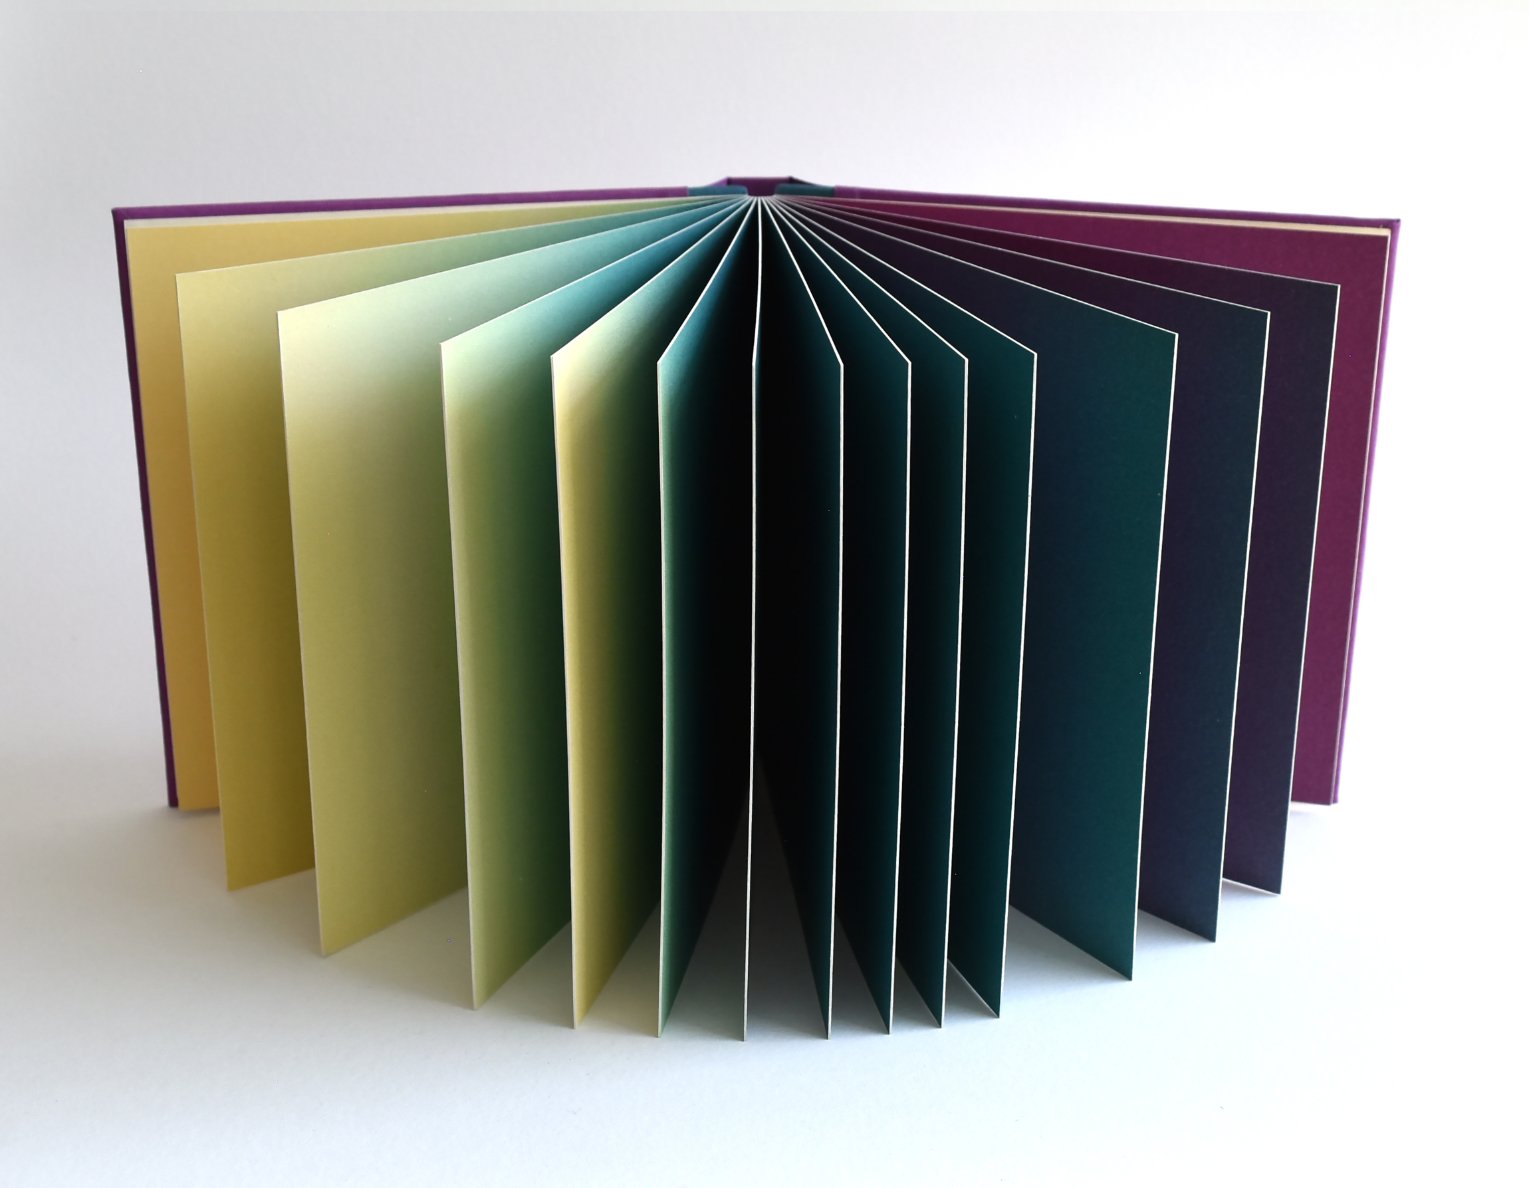   Nicholas Shick   Radiate  (2019-2023) Letterpress on Mohawk superfine, drum leaf binding with hard covers, edition of 3. Volumes 1 - 8.&nbsp; 